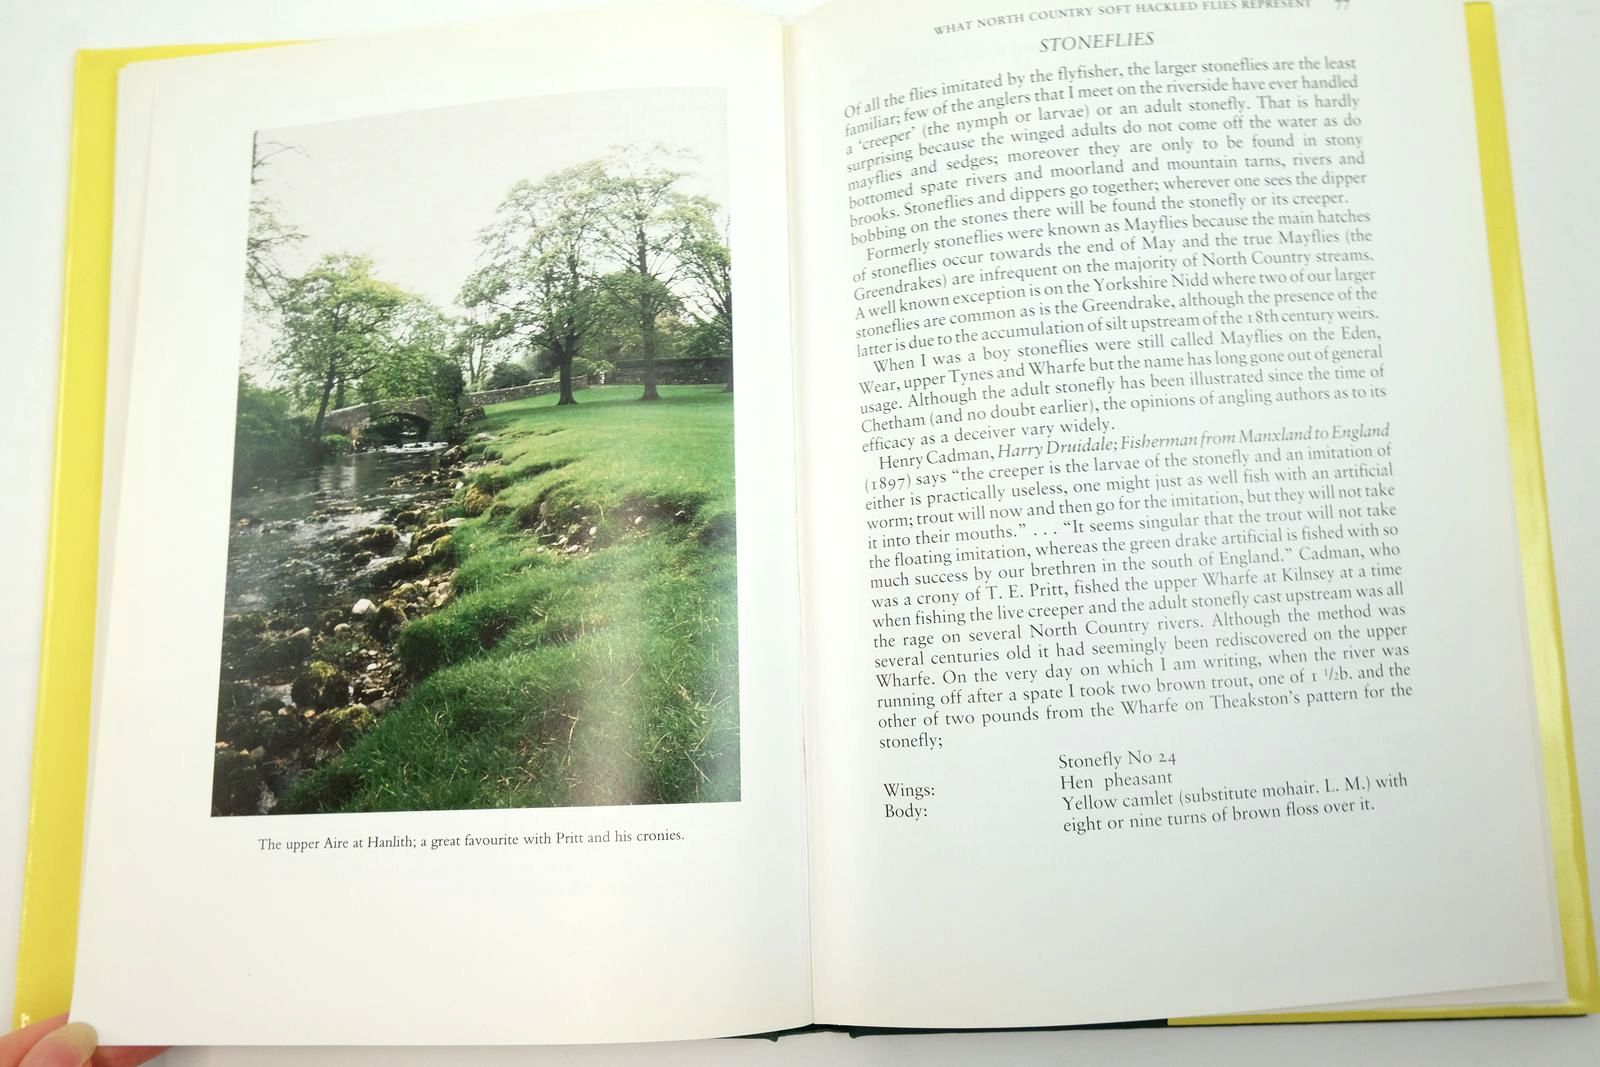 Photo of FLY FISHING: THE NORTH COUNTRY TRADITION written by Magee, Leslie published by Smith Settle Ltd. (STOCK CODE: 2139602)  for sale by Stella & Rose's Books